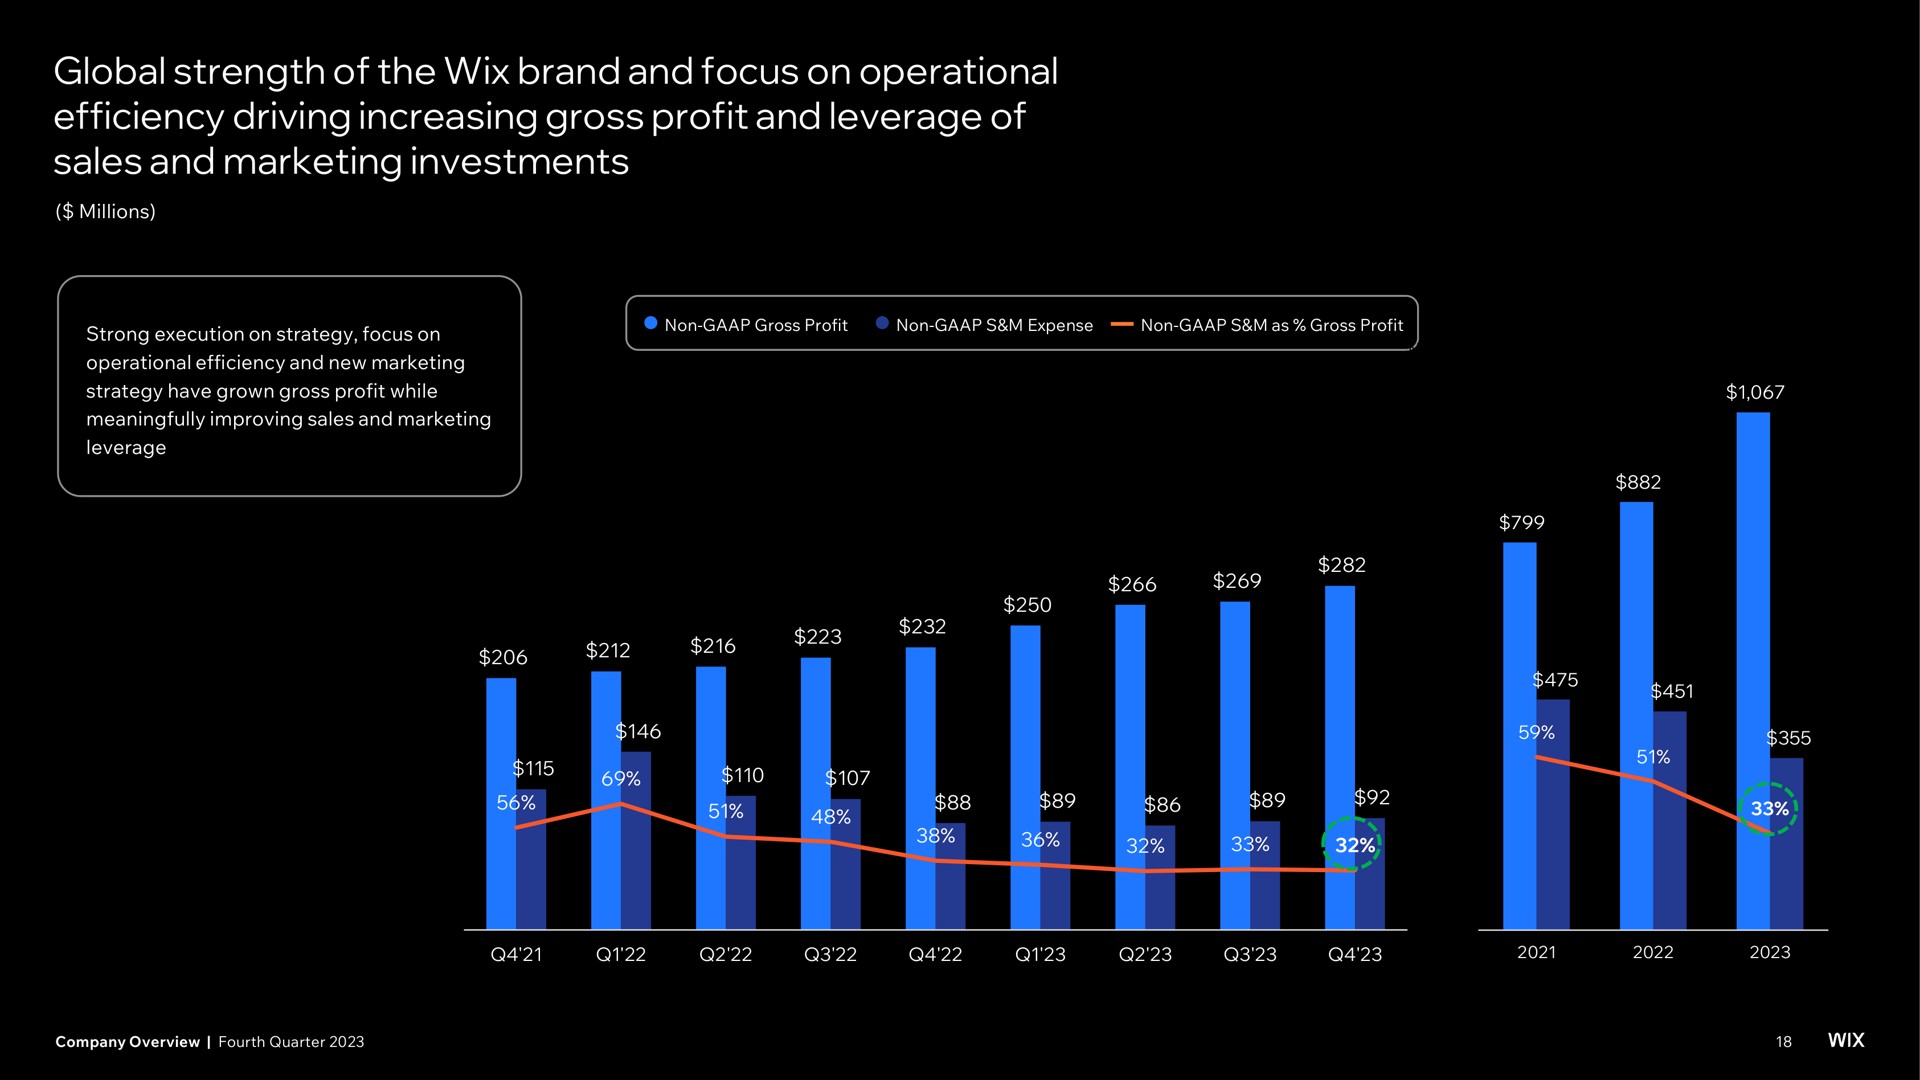 global strength of the brand and focus on operational efficiency driving increasing gross profit and leverage of sales and marketing investments | Wix